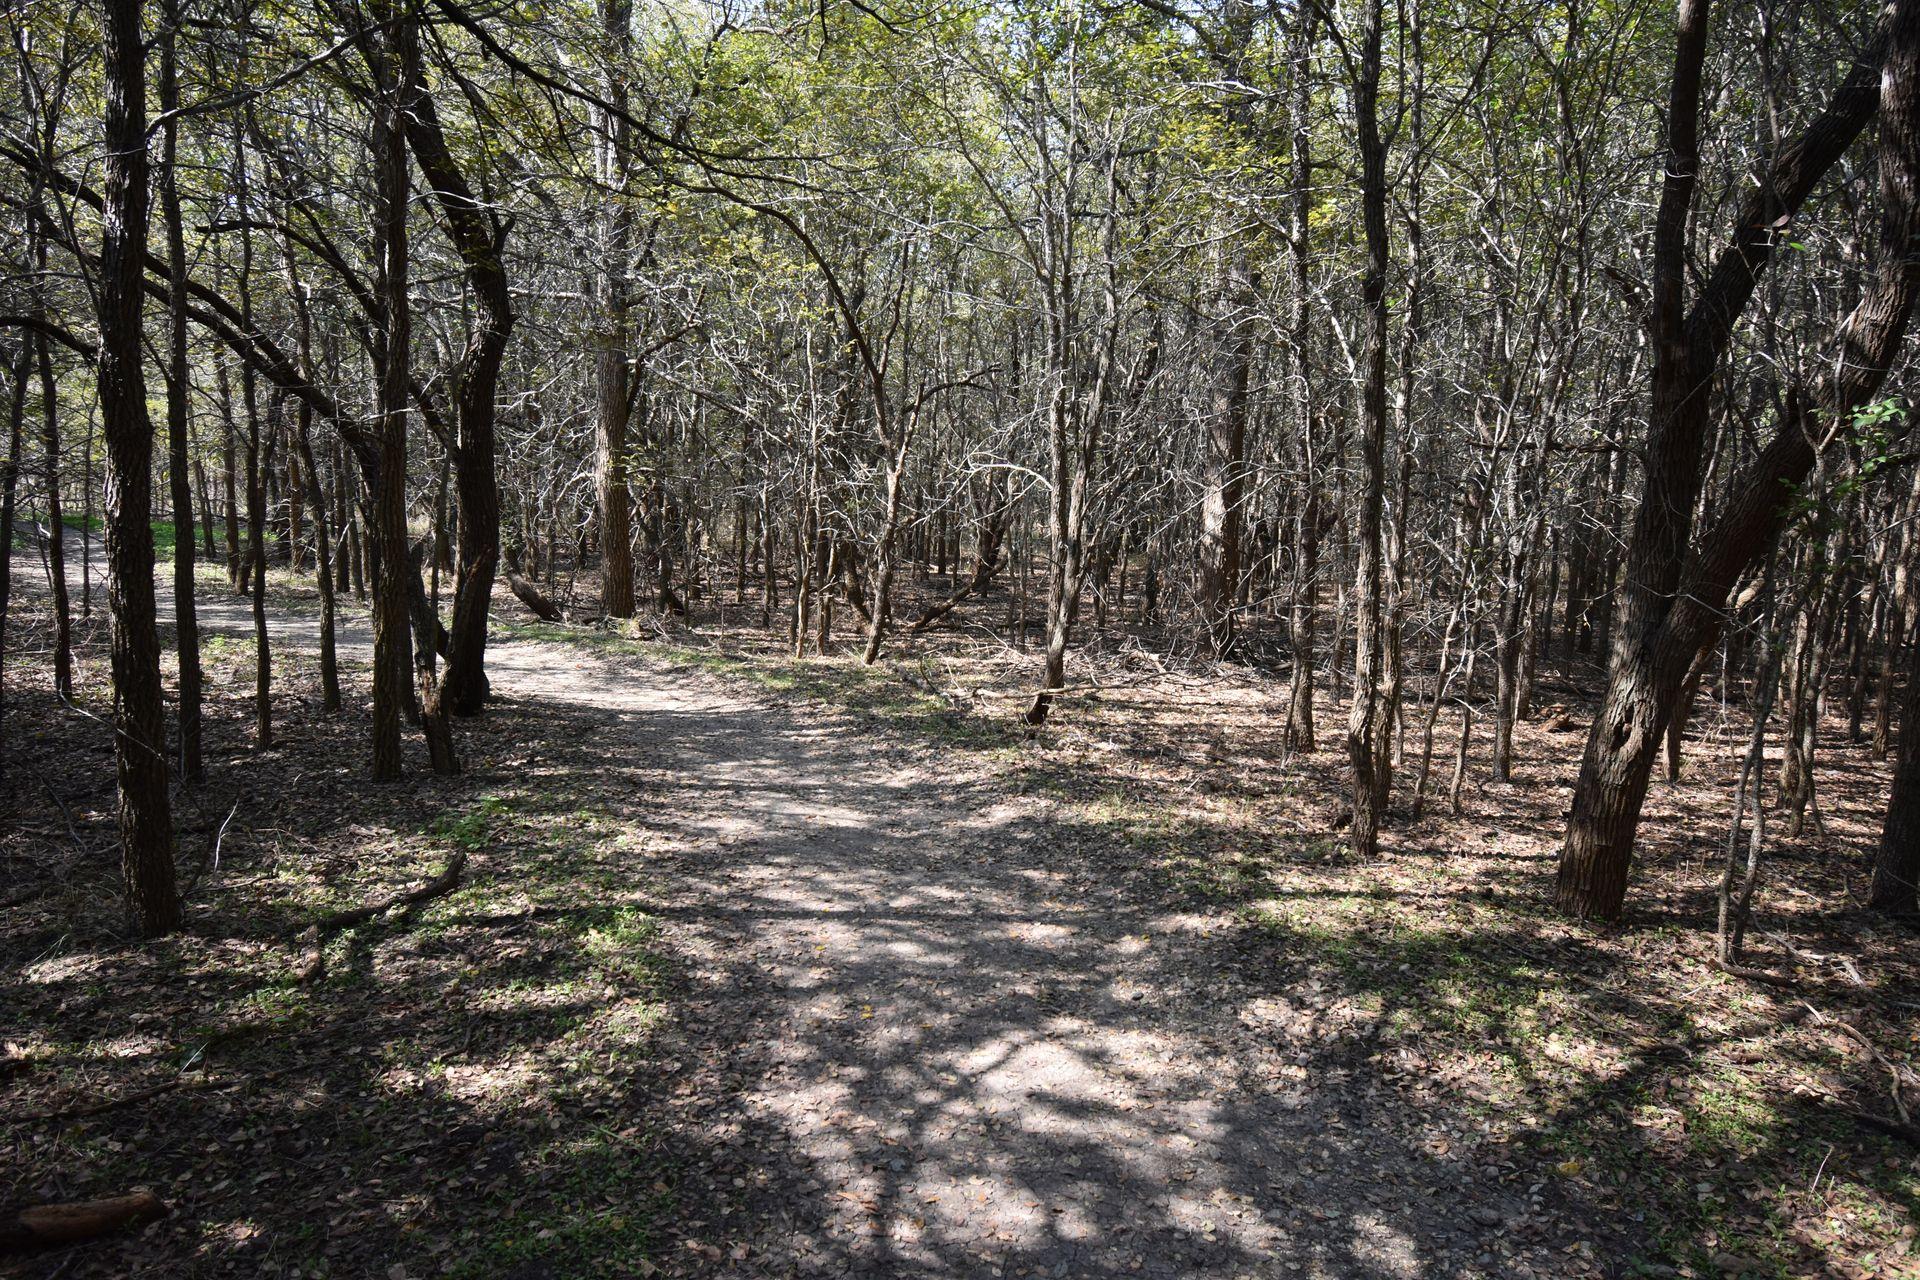 A trail through the woods. There are several trees with very little leaves.